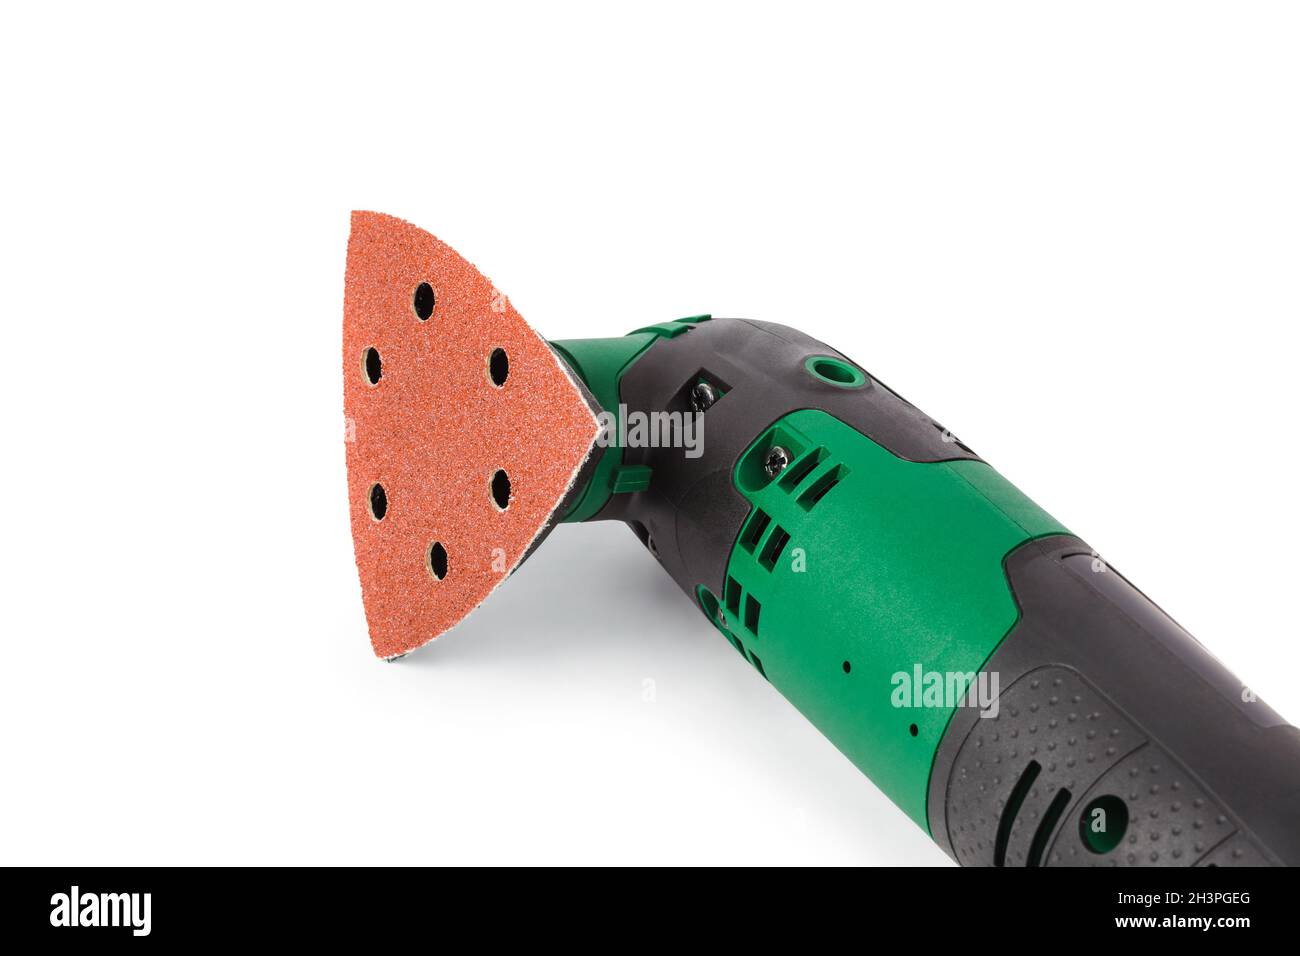 Fretsaw power tool with grinding attachment Stock Photo